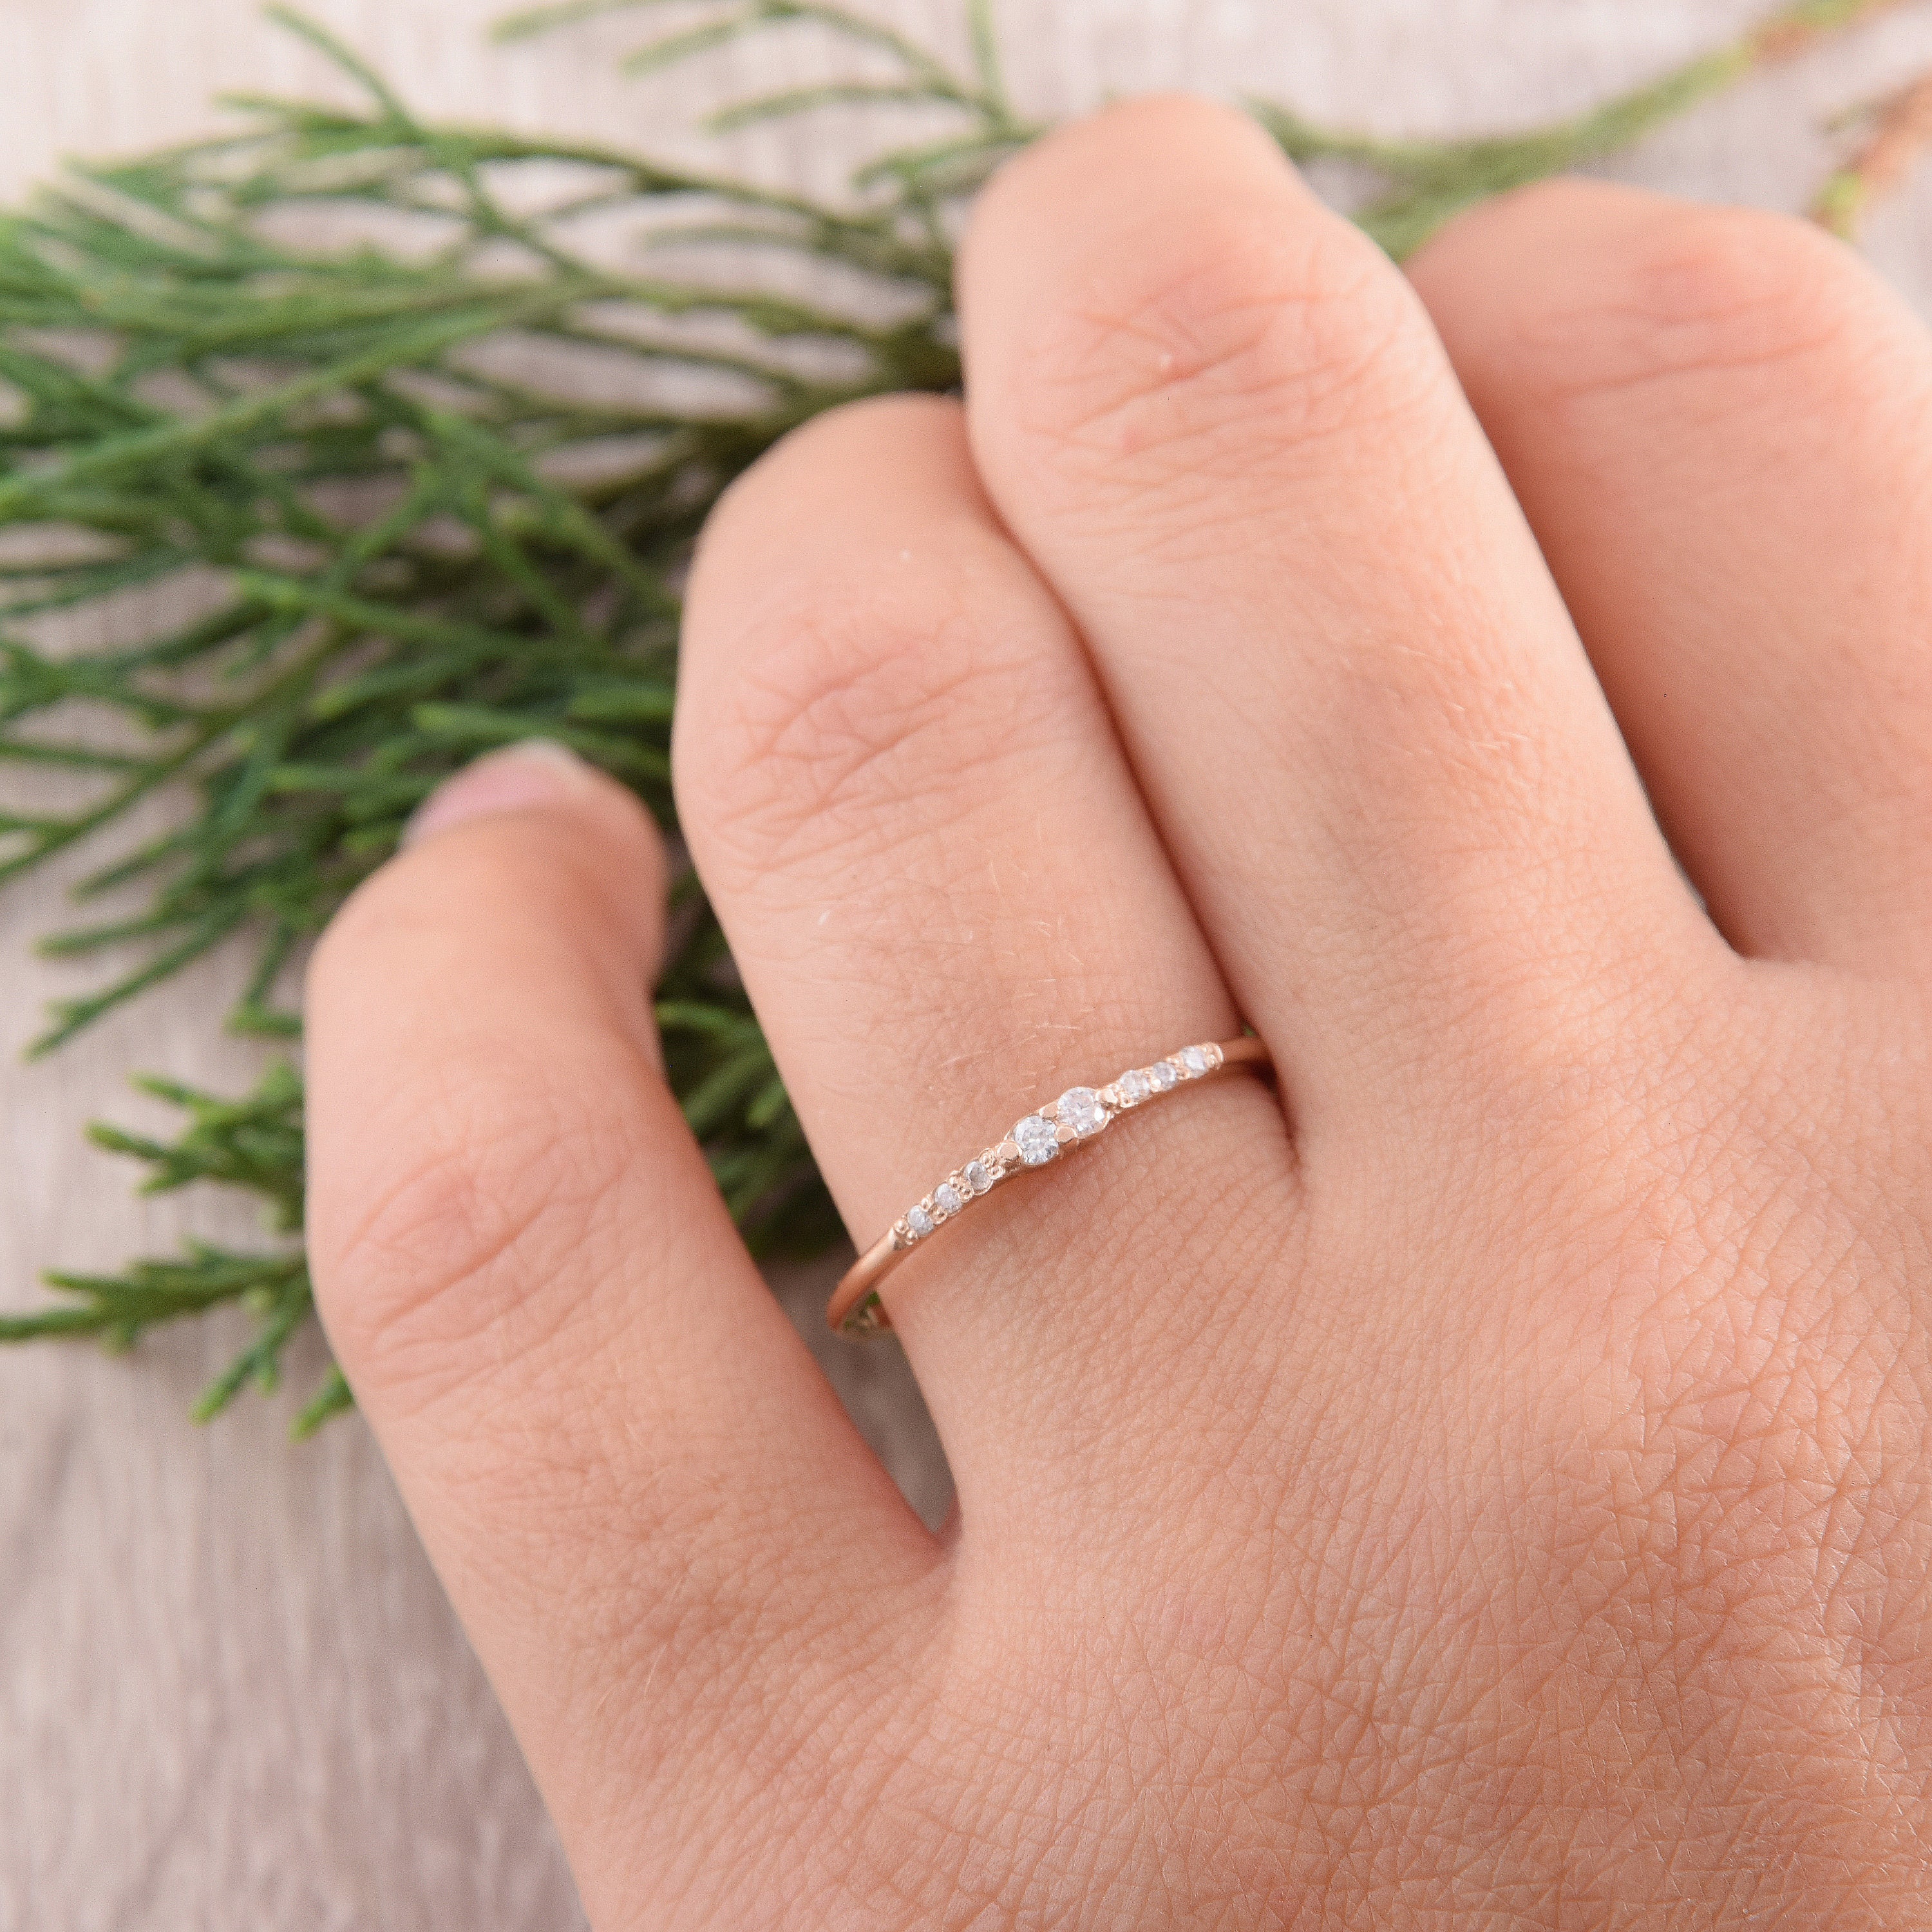 Buy Delicate Minimalist 14k Yellow Gold 3 Stone Diamond Promise Ring for  Her,small & Dainty Womens White Diamond Engagement Ring,diamond Jewelry  Online in India - Etsy